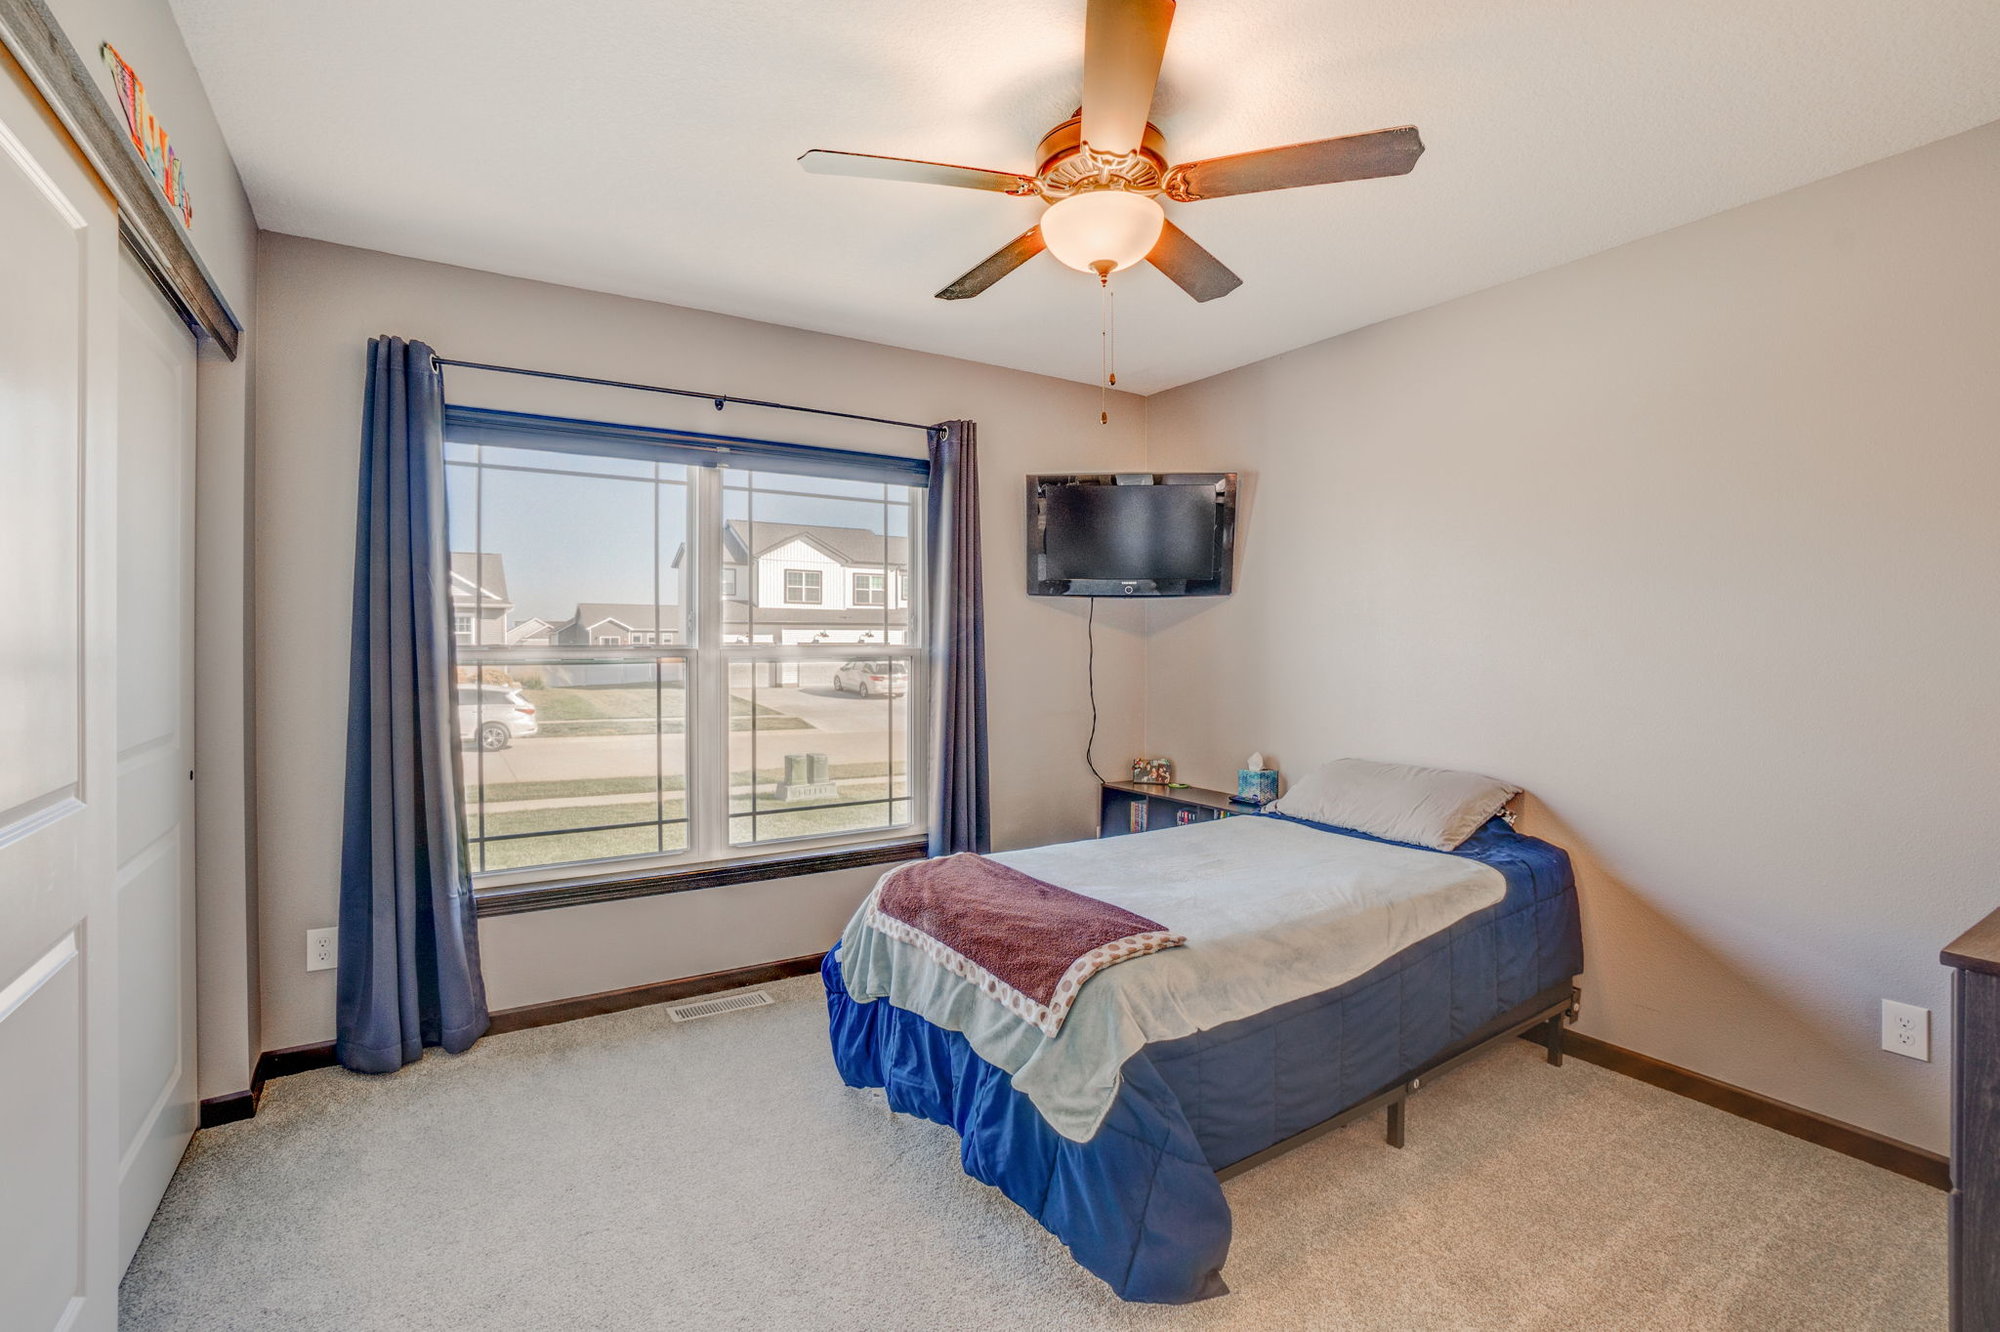 Get New Construction Amenities Without the Building Process in this Stunning Cedar Falls Home